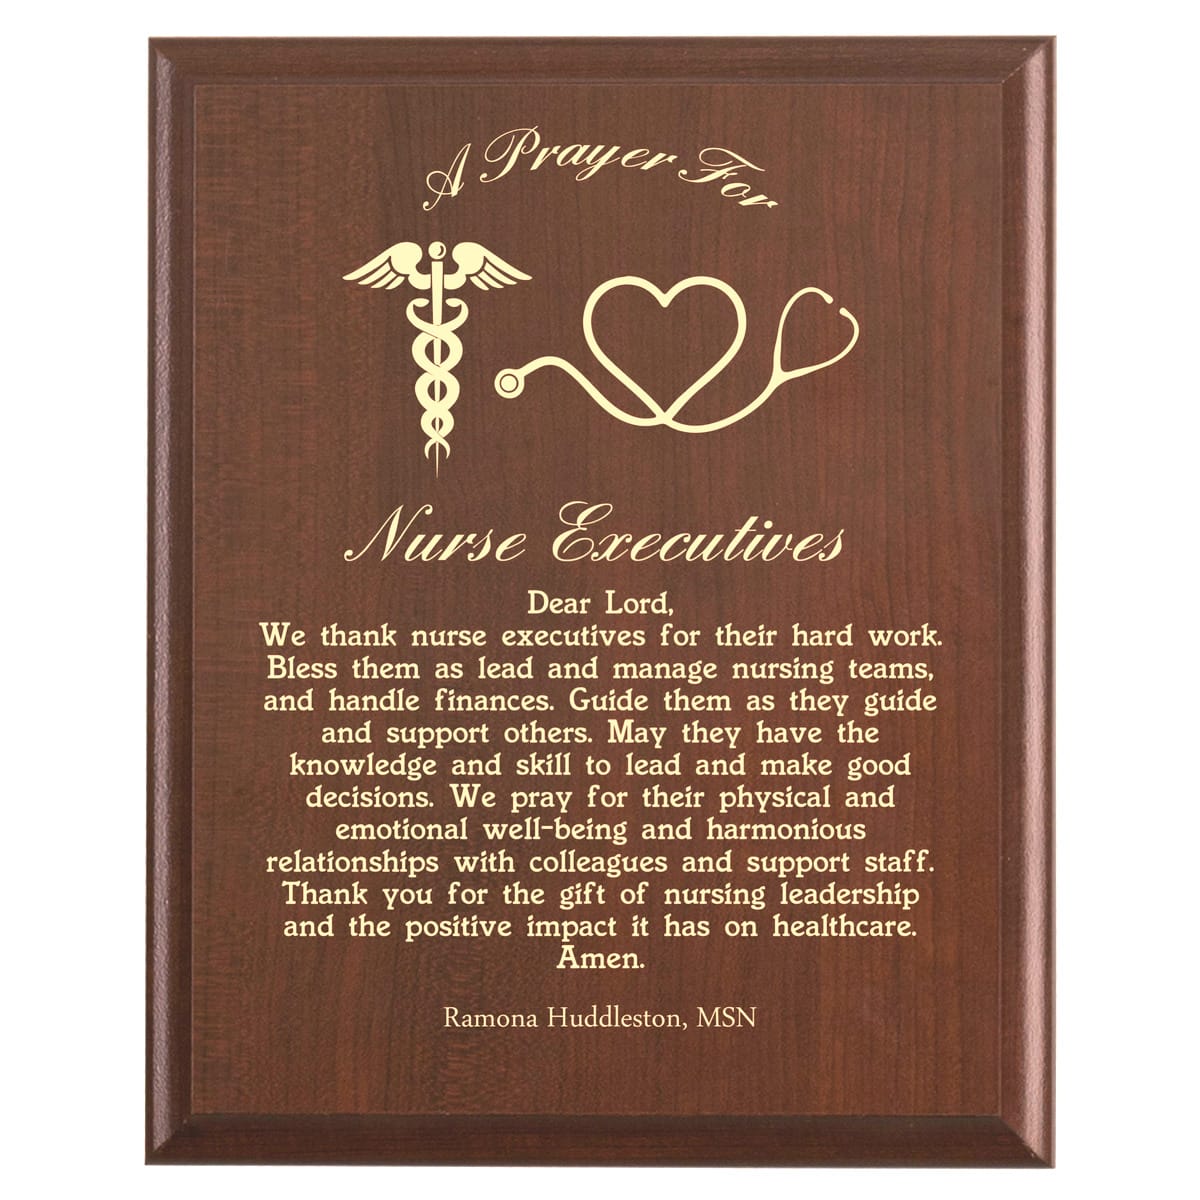 Plaque photo: Nurse Executives Prayer Plaque design with free personalization. Wood style finish with customized text.